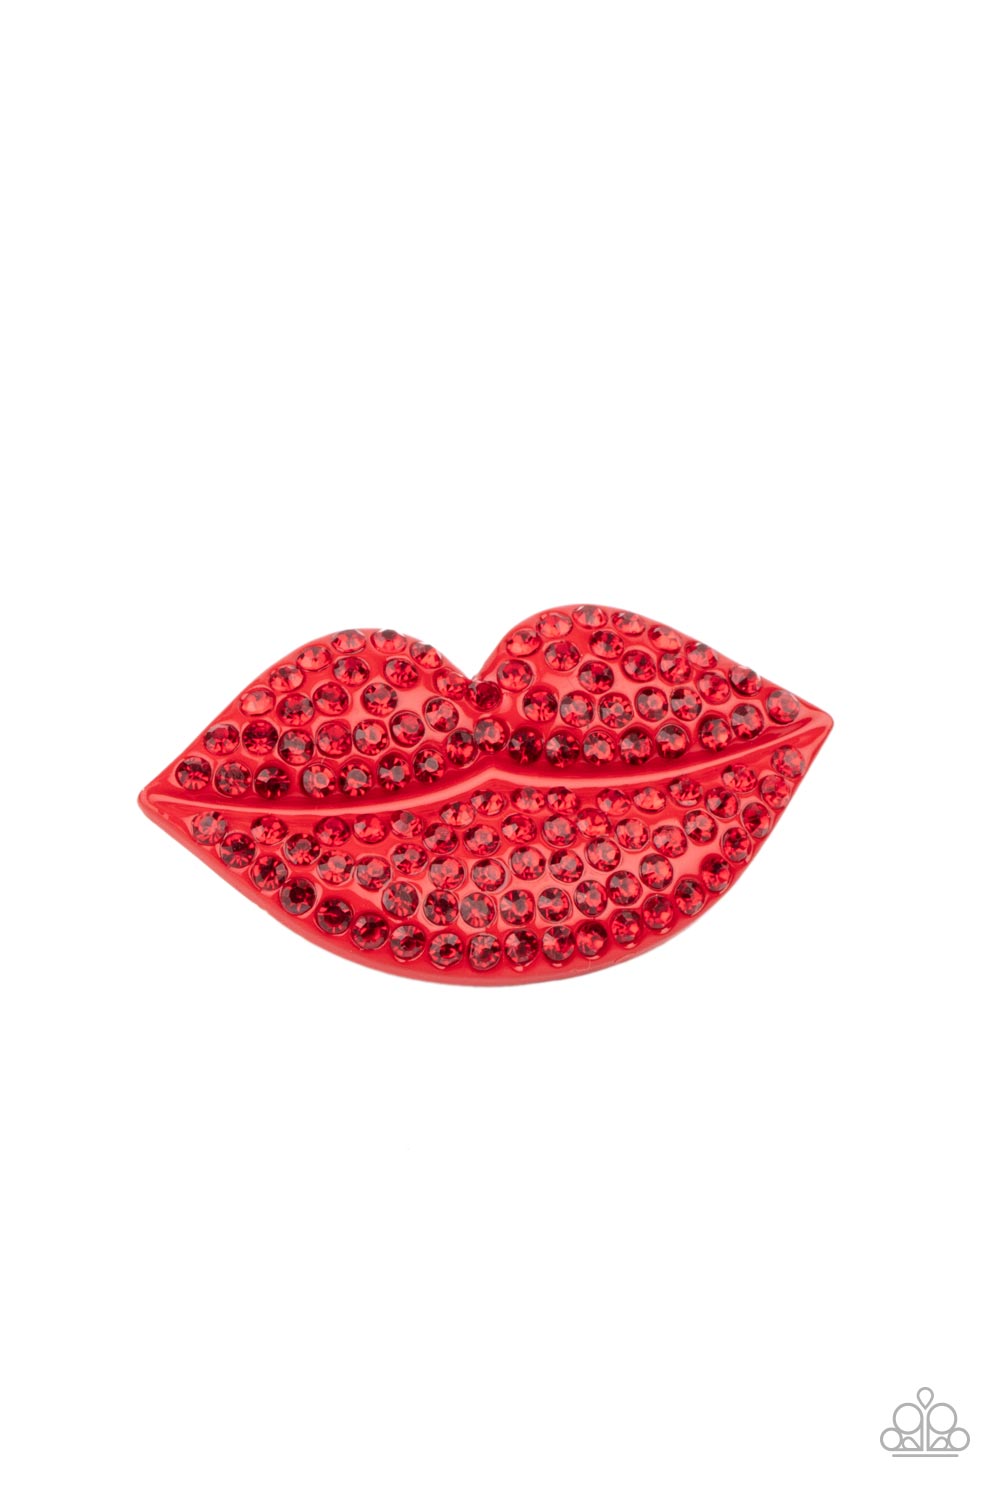 PRE-ORDER - Paparazzi HAIR Kiss - Red - Hair Clip - $5 Jewelry with Ashley Swint